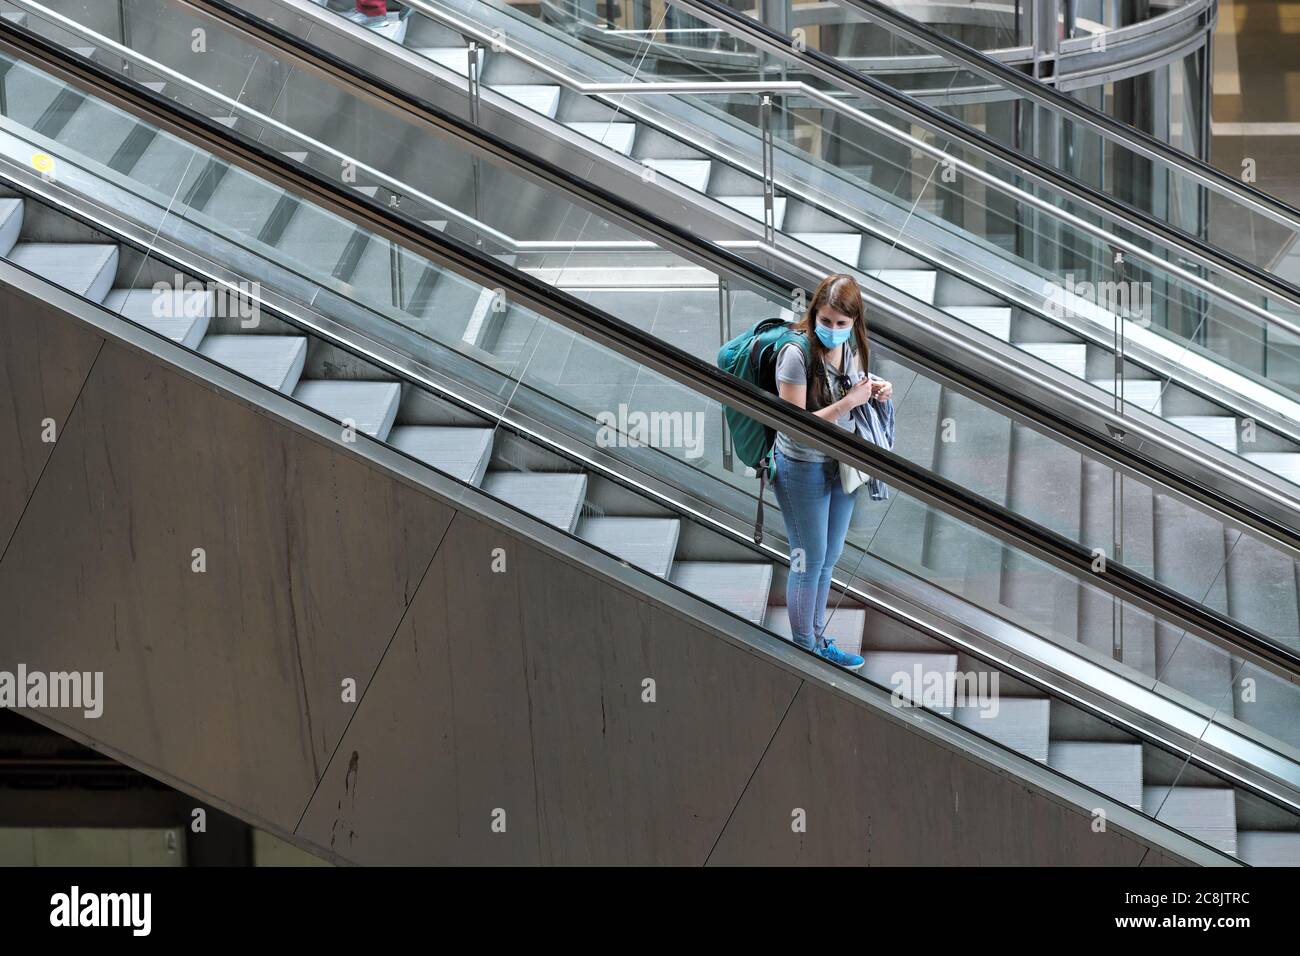 Berlin Germany a lone female visitor with backpack and coronavirus facemask travels on an escalator at Berlin Hauptbahnhof railway station July 2020 Stock Photo